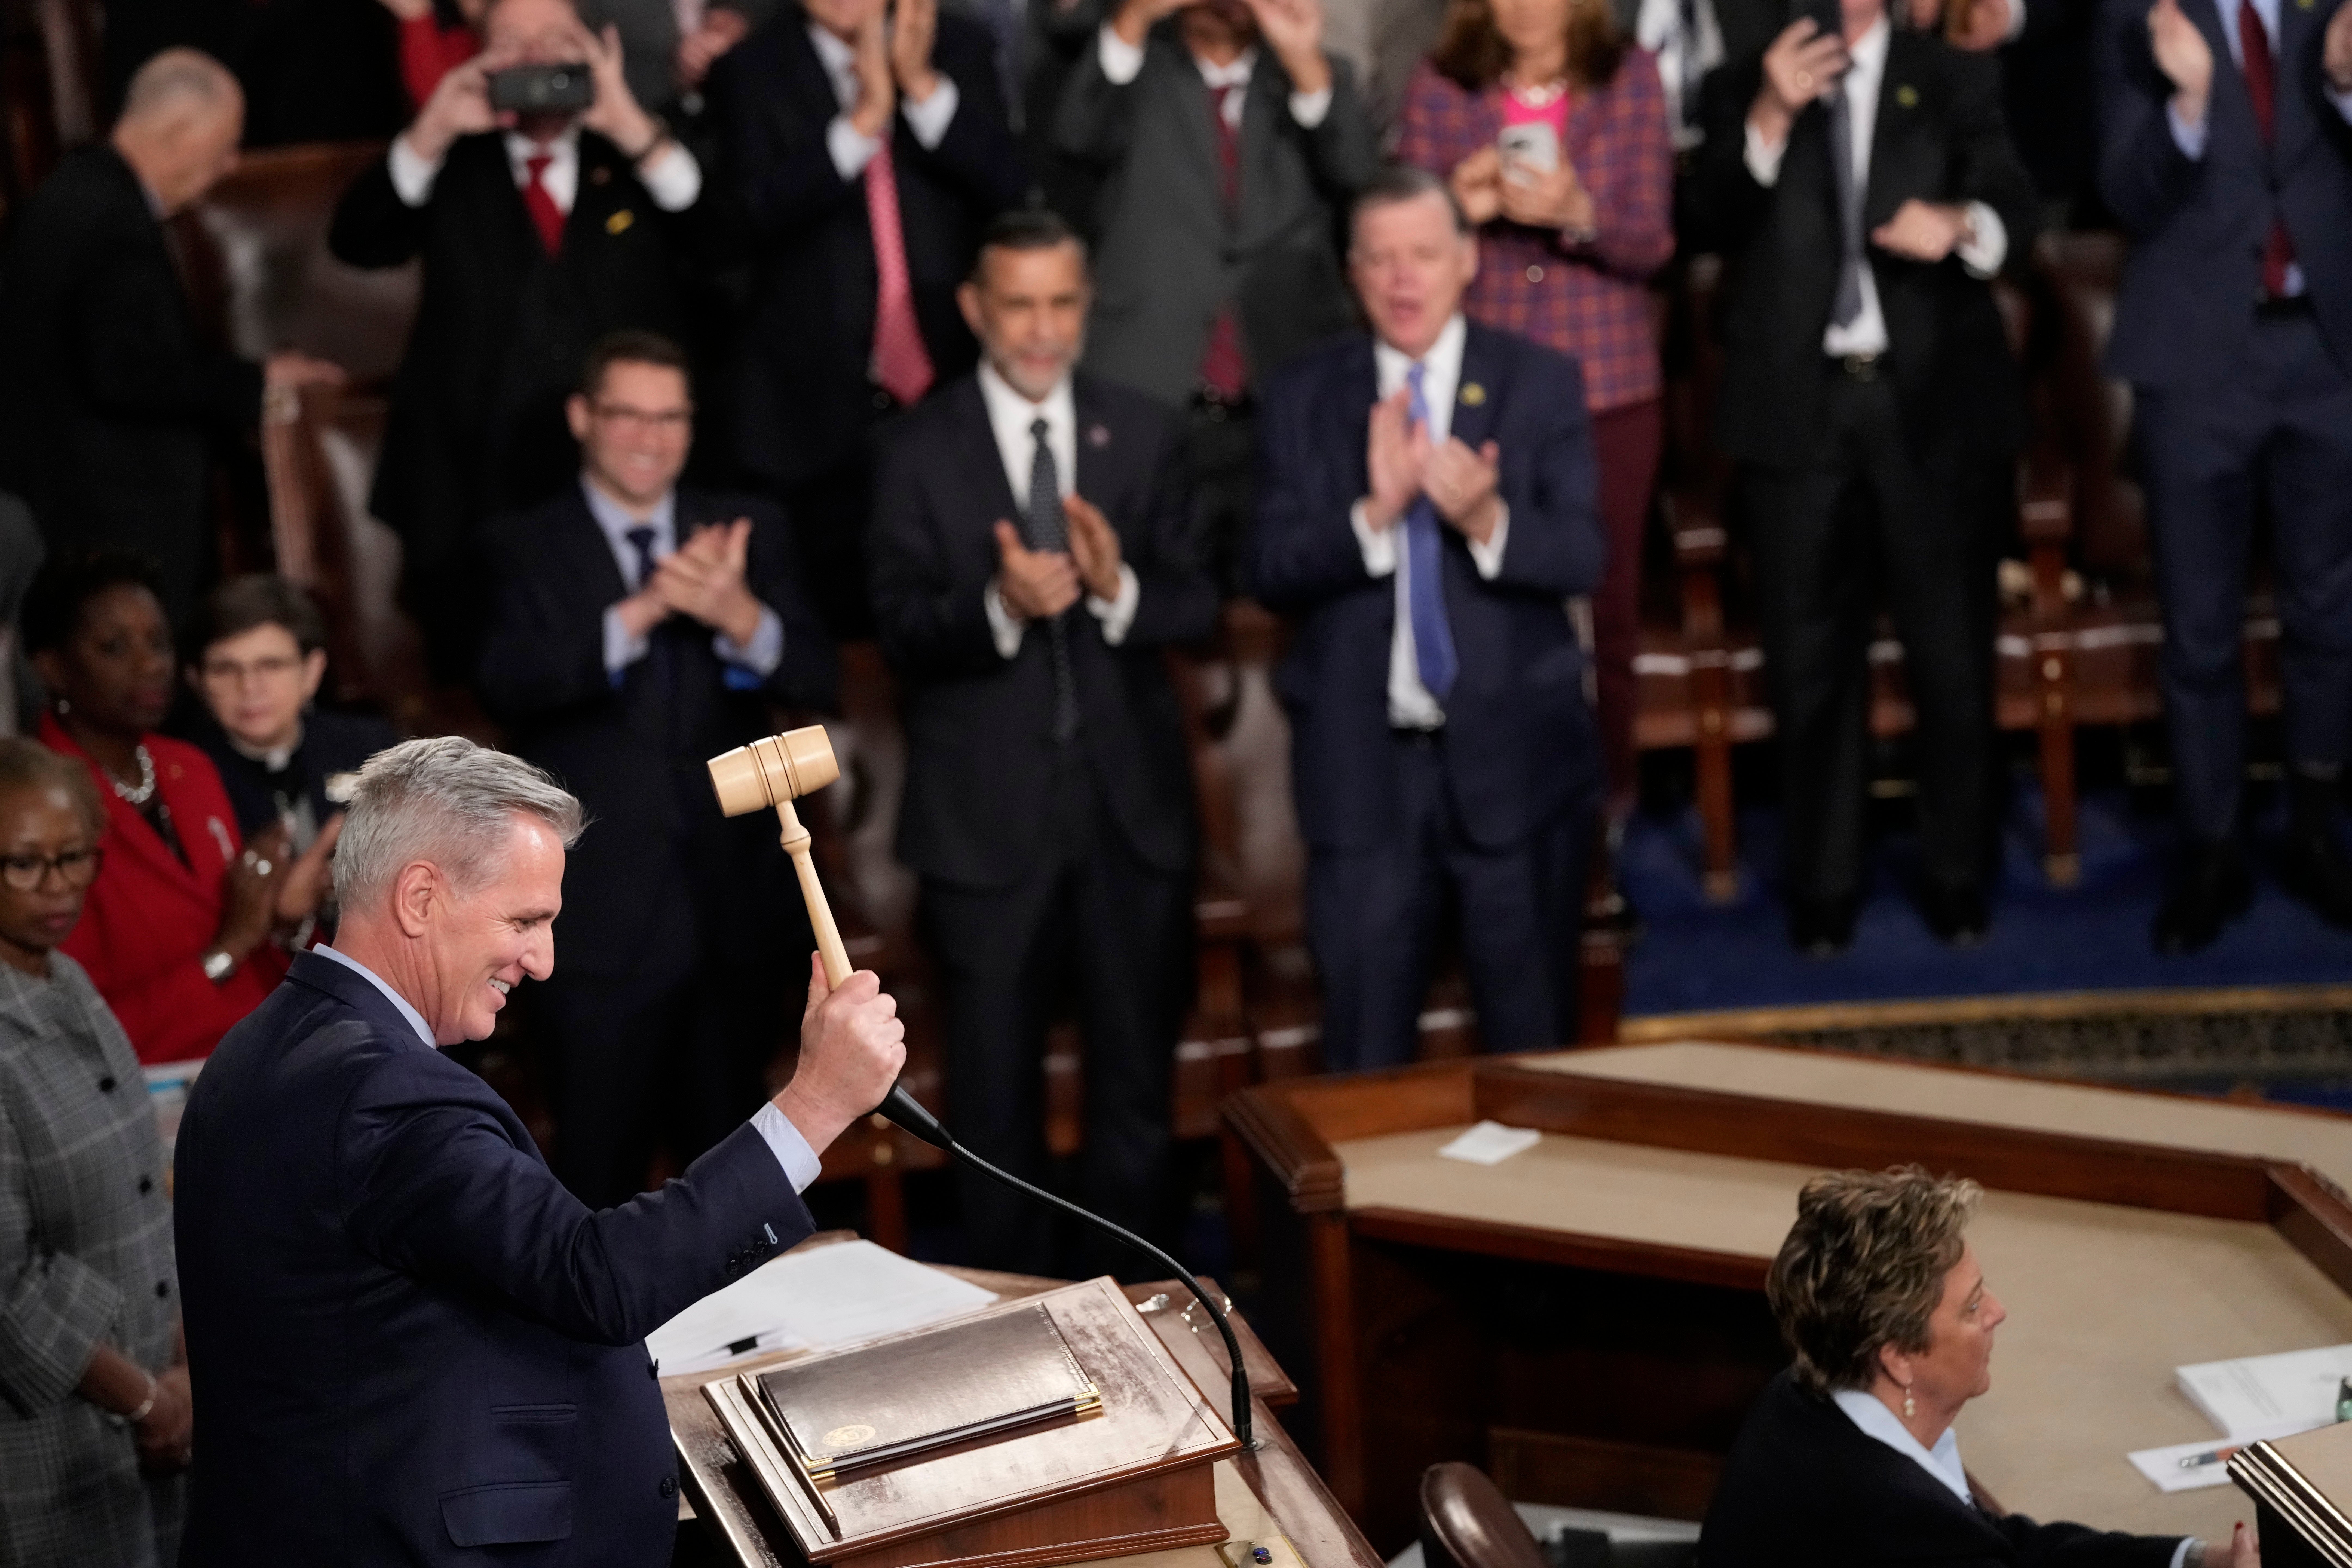 McCarthy finally got his hands on the gavel